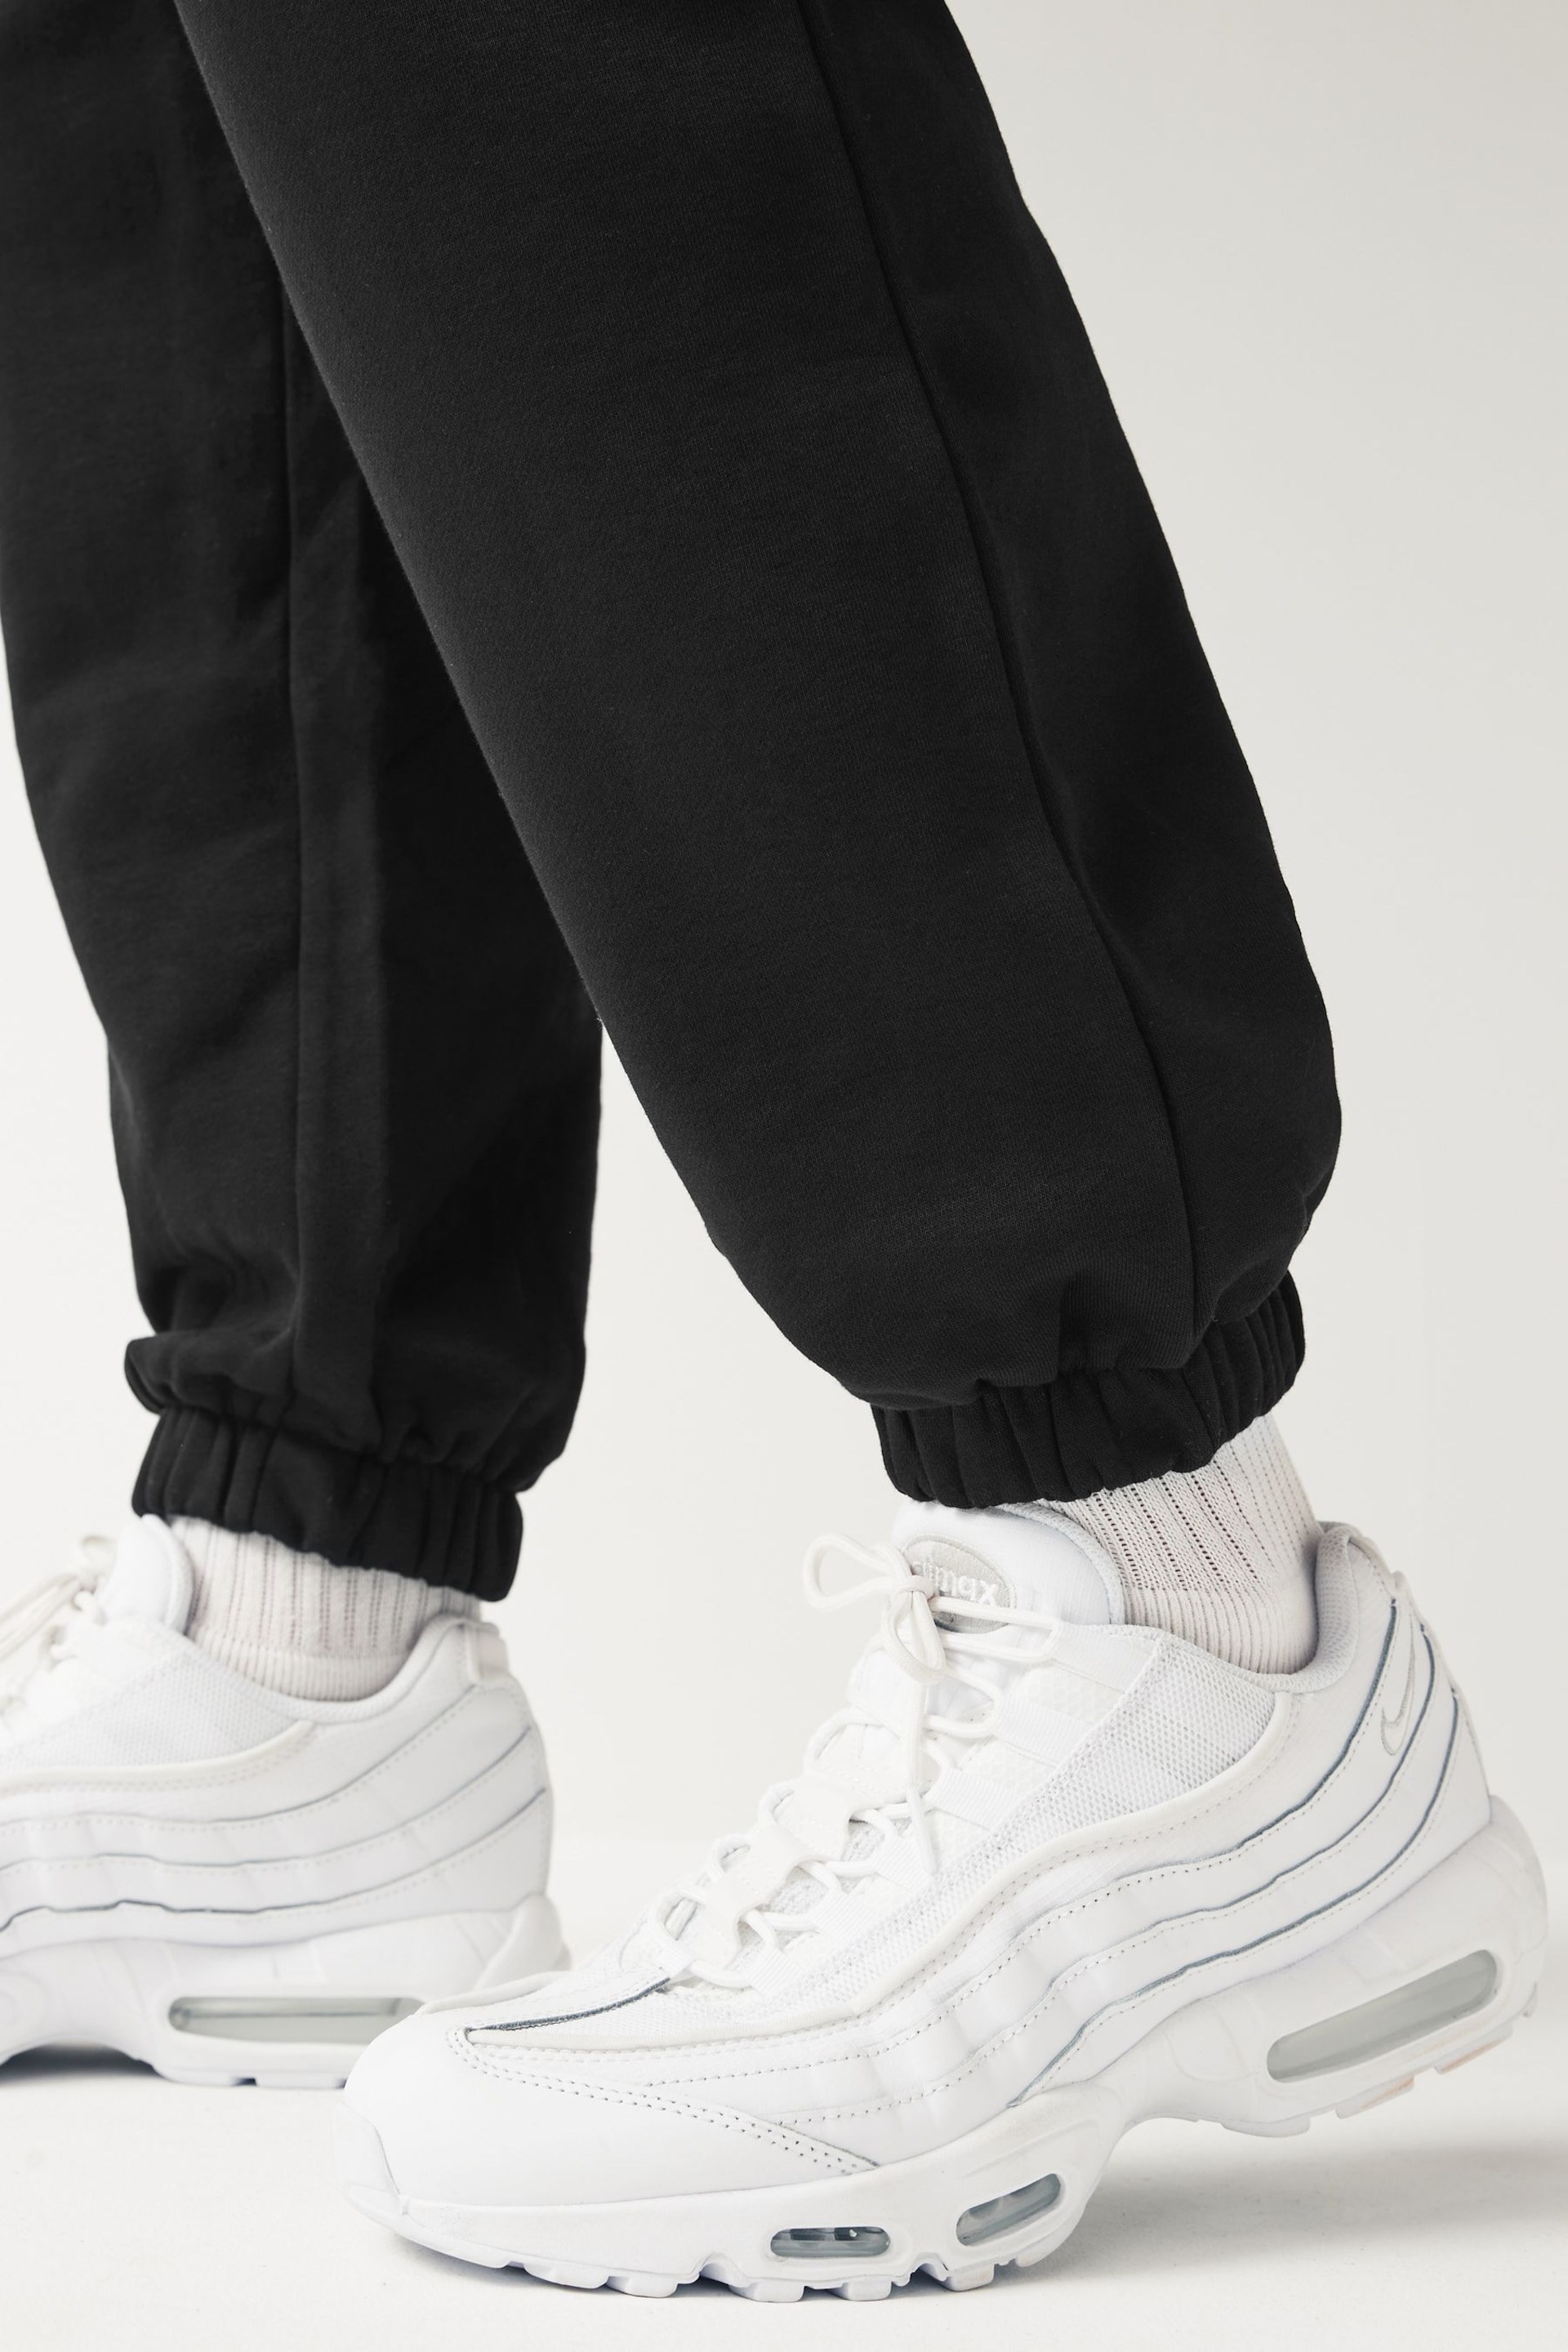 Black Oversized Cotton Blend Cuffed Joggers - Image 5 of 8